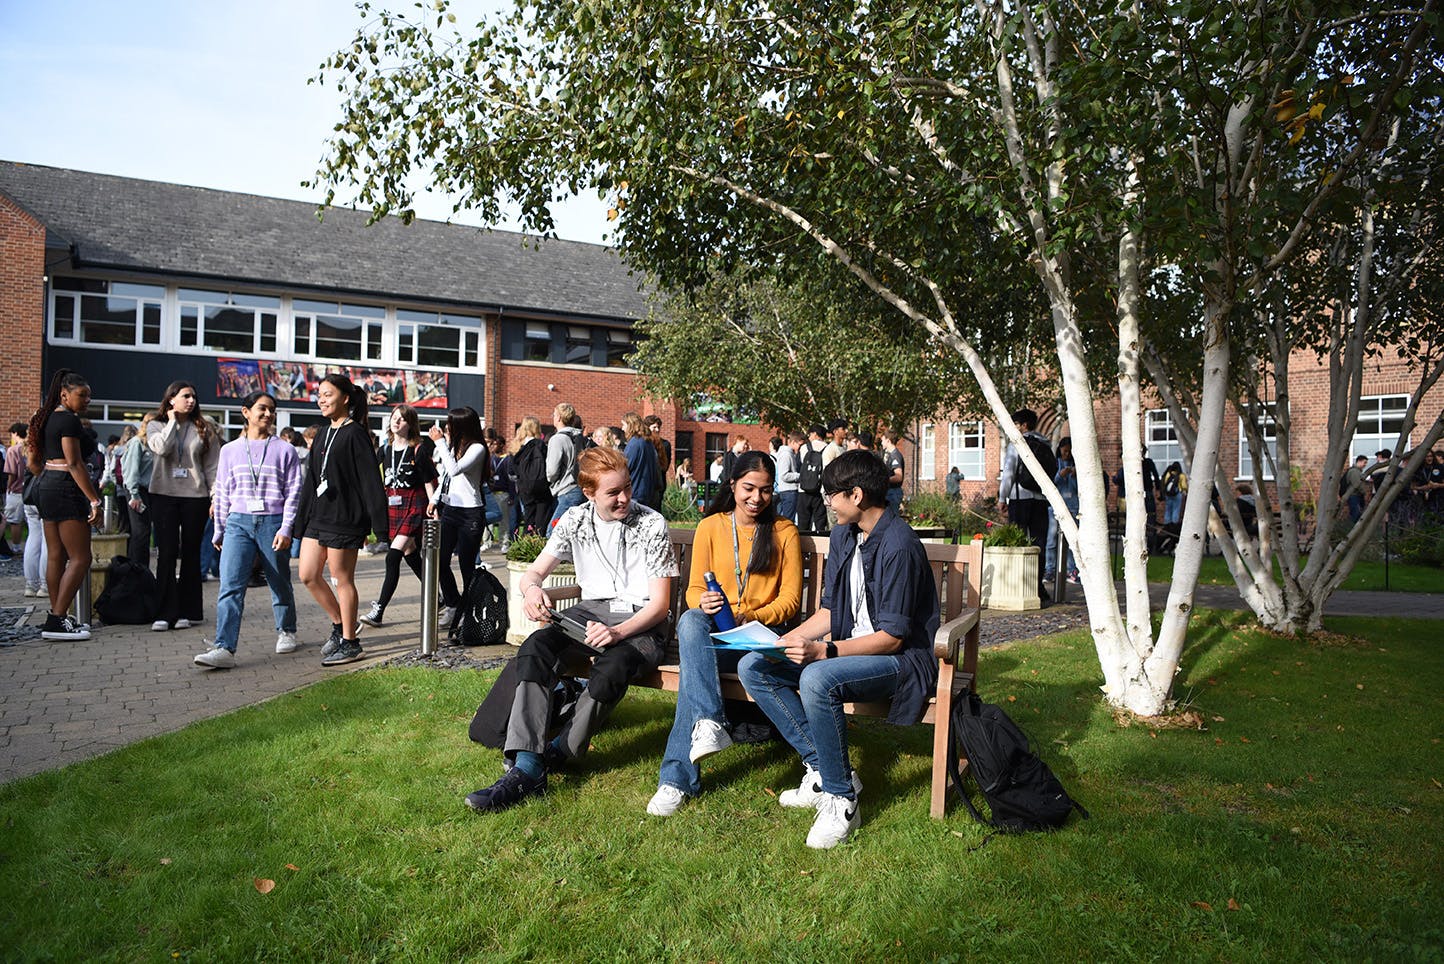 Students socialising in the quad area